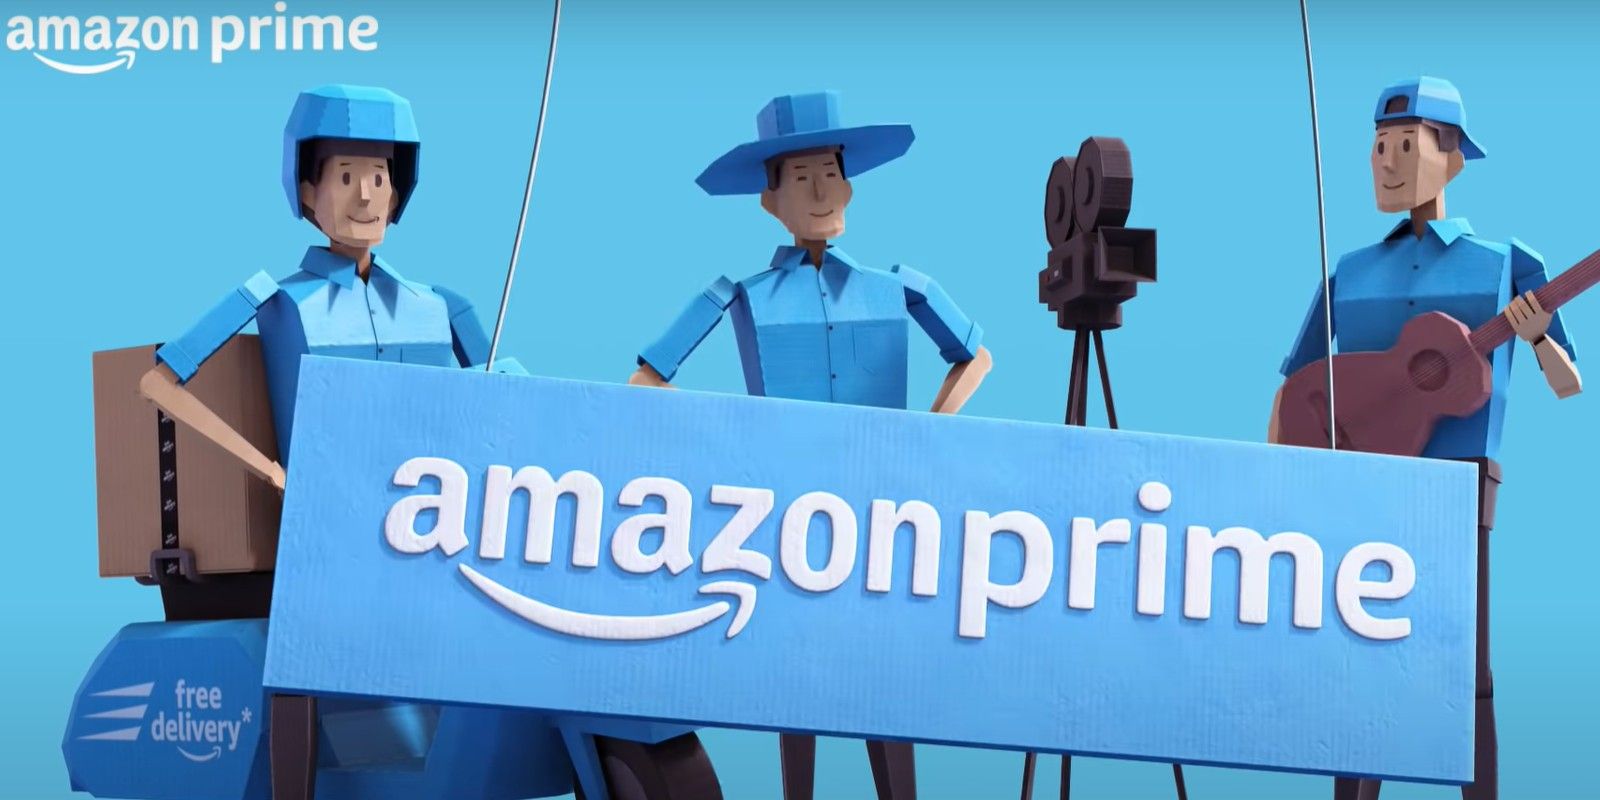 Is Amazon Prime Going Up In Price? New Price Revealed